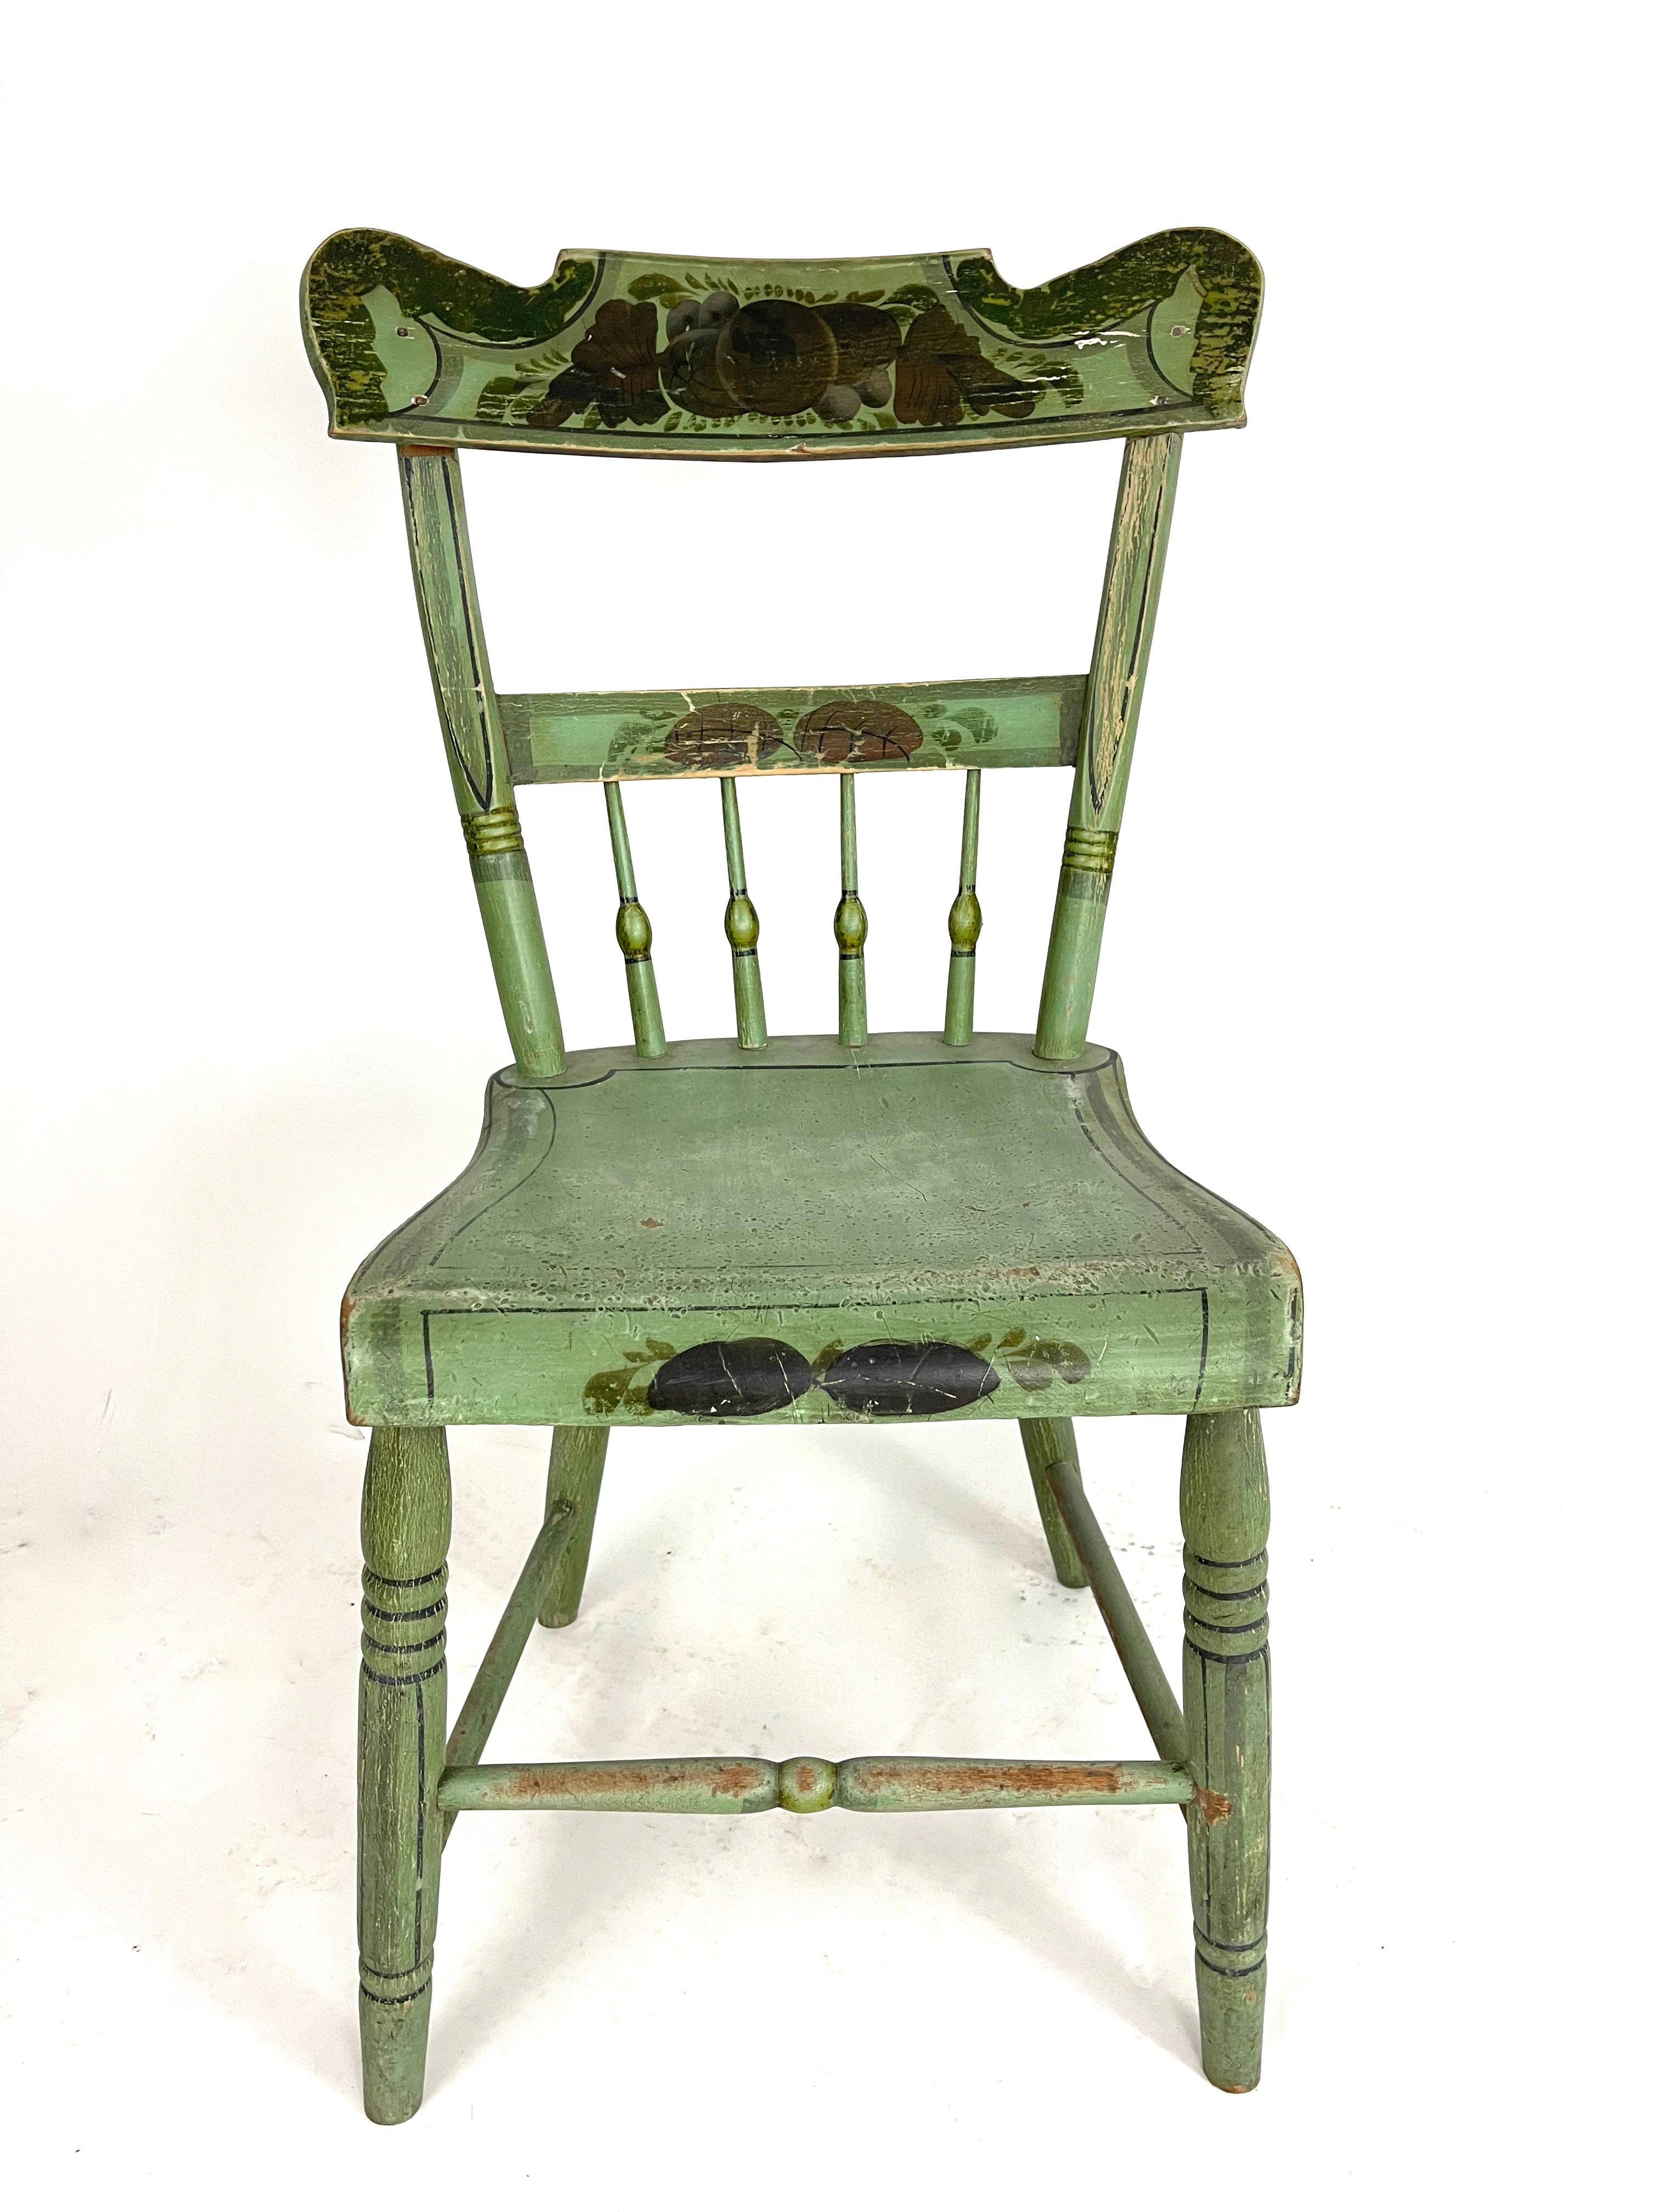 Oak Set of 6 19th Century American Country Green Painted Dining Chairs, c. 1820-30